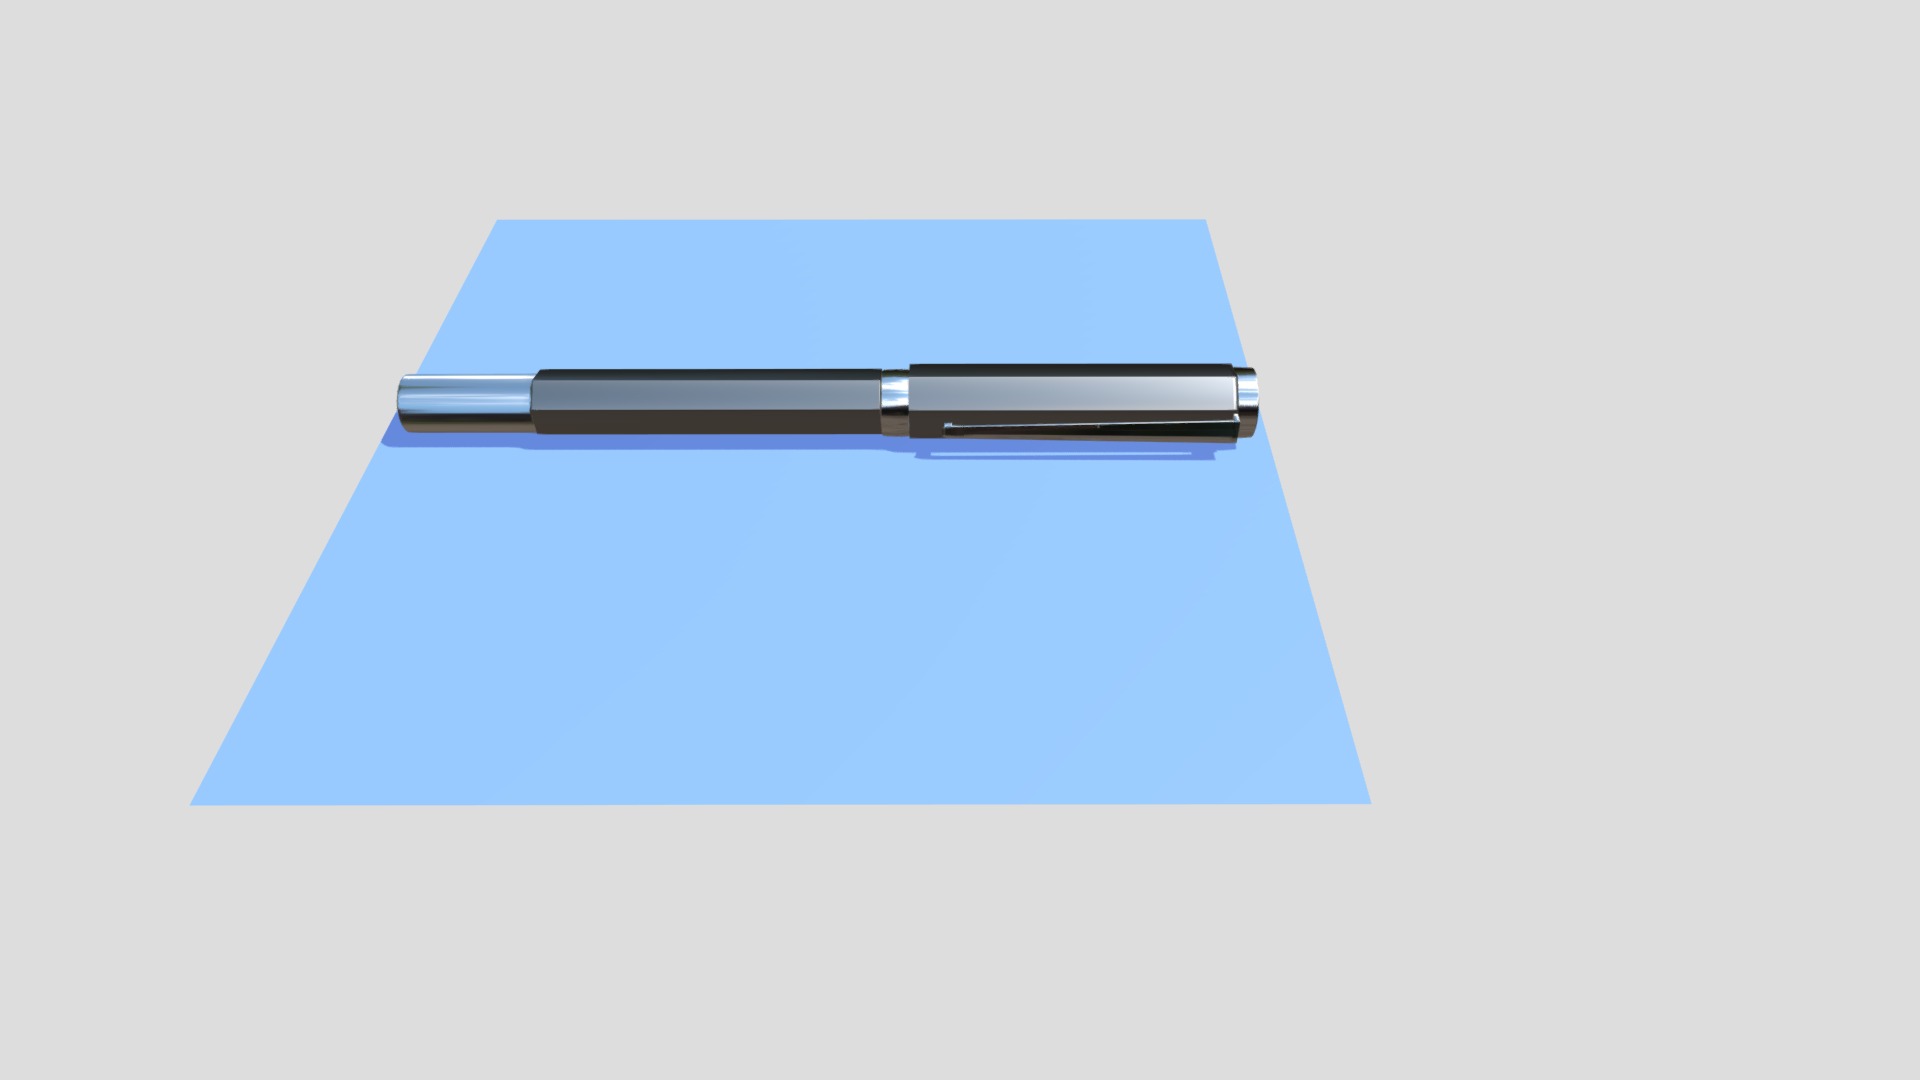 3D model Silver And Chrome Pen - This is a 3D model of the Silver And Chrome Pen. The 3D model is about a blue square with a white background.